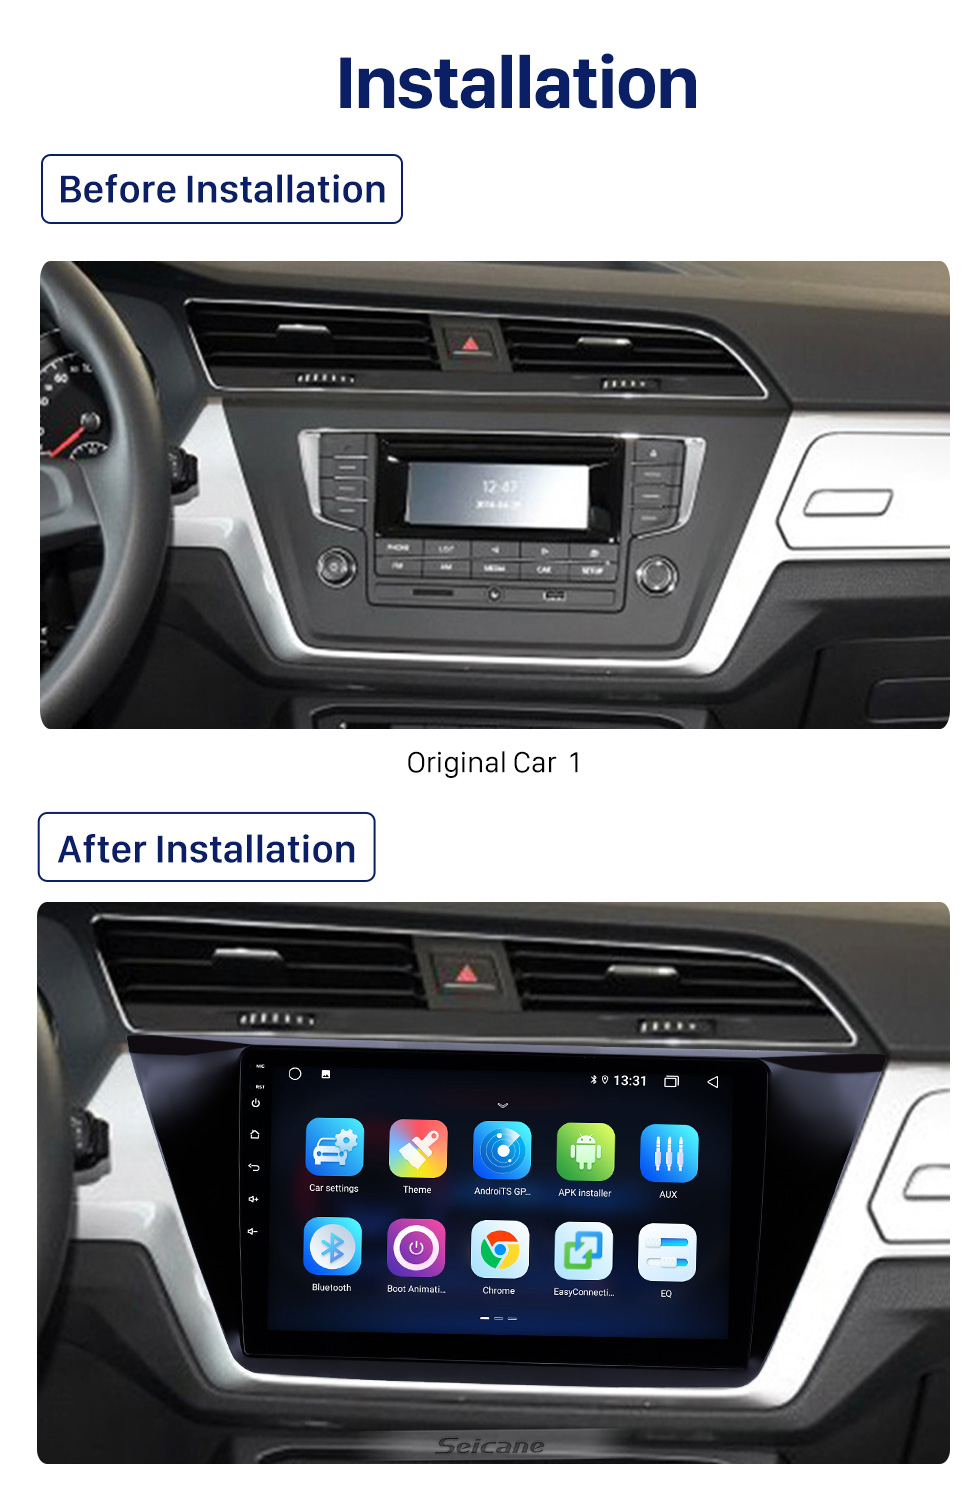 Seicane 10.1 inch Android 10.0 GPS Navigation Radio for 2016-2018 VW Volkswagen Touran with Bluetooth USB AUX support Carplay TPMS 